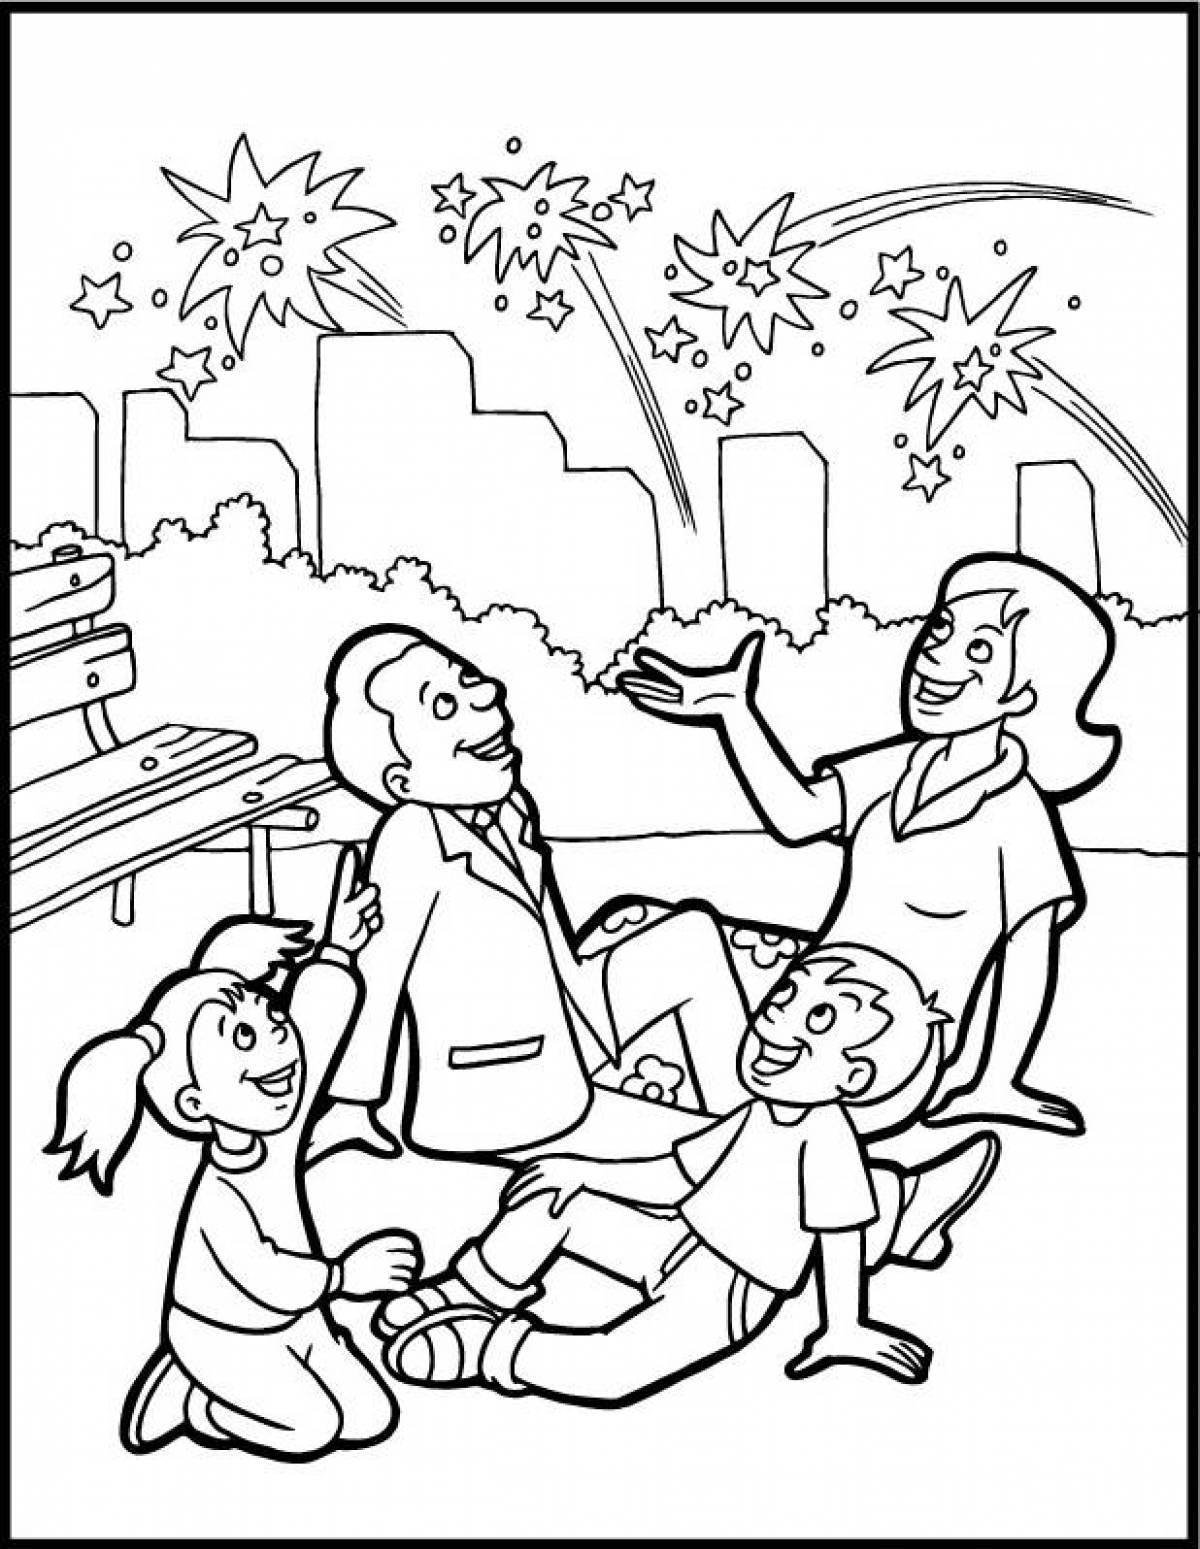 Victory Day coloring book